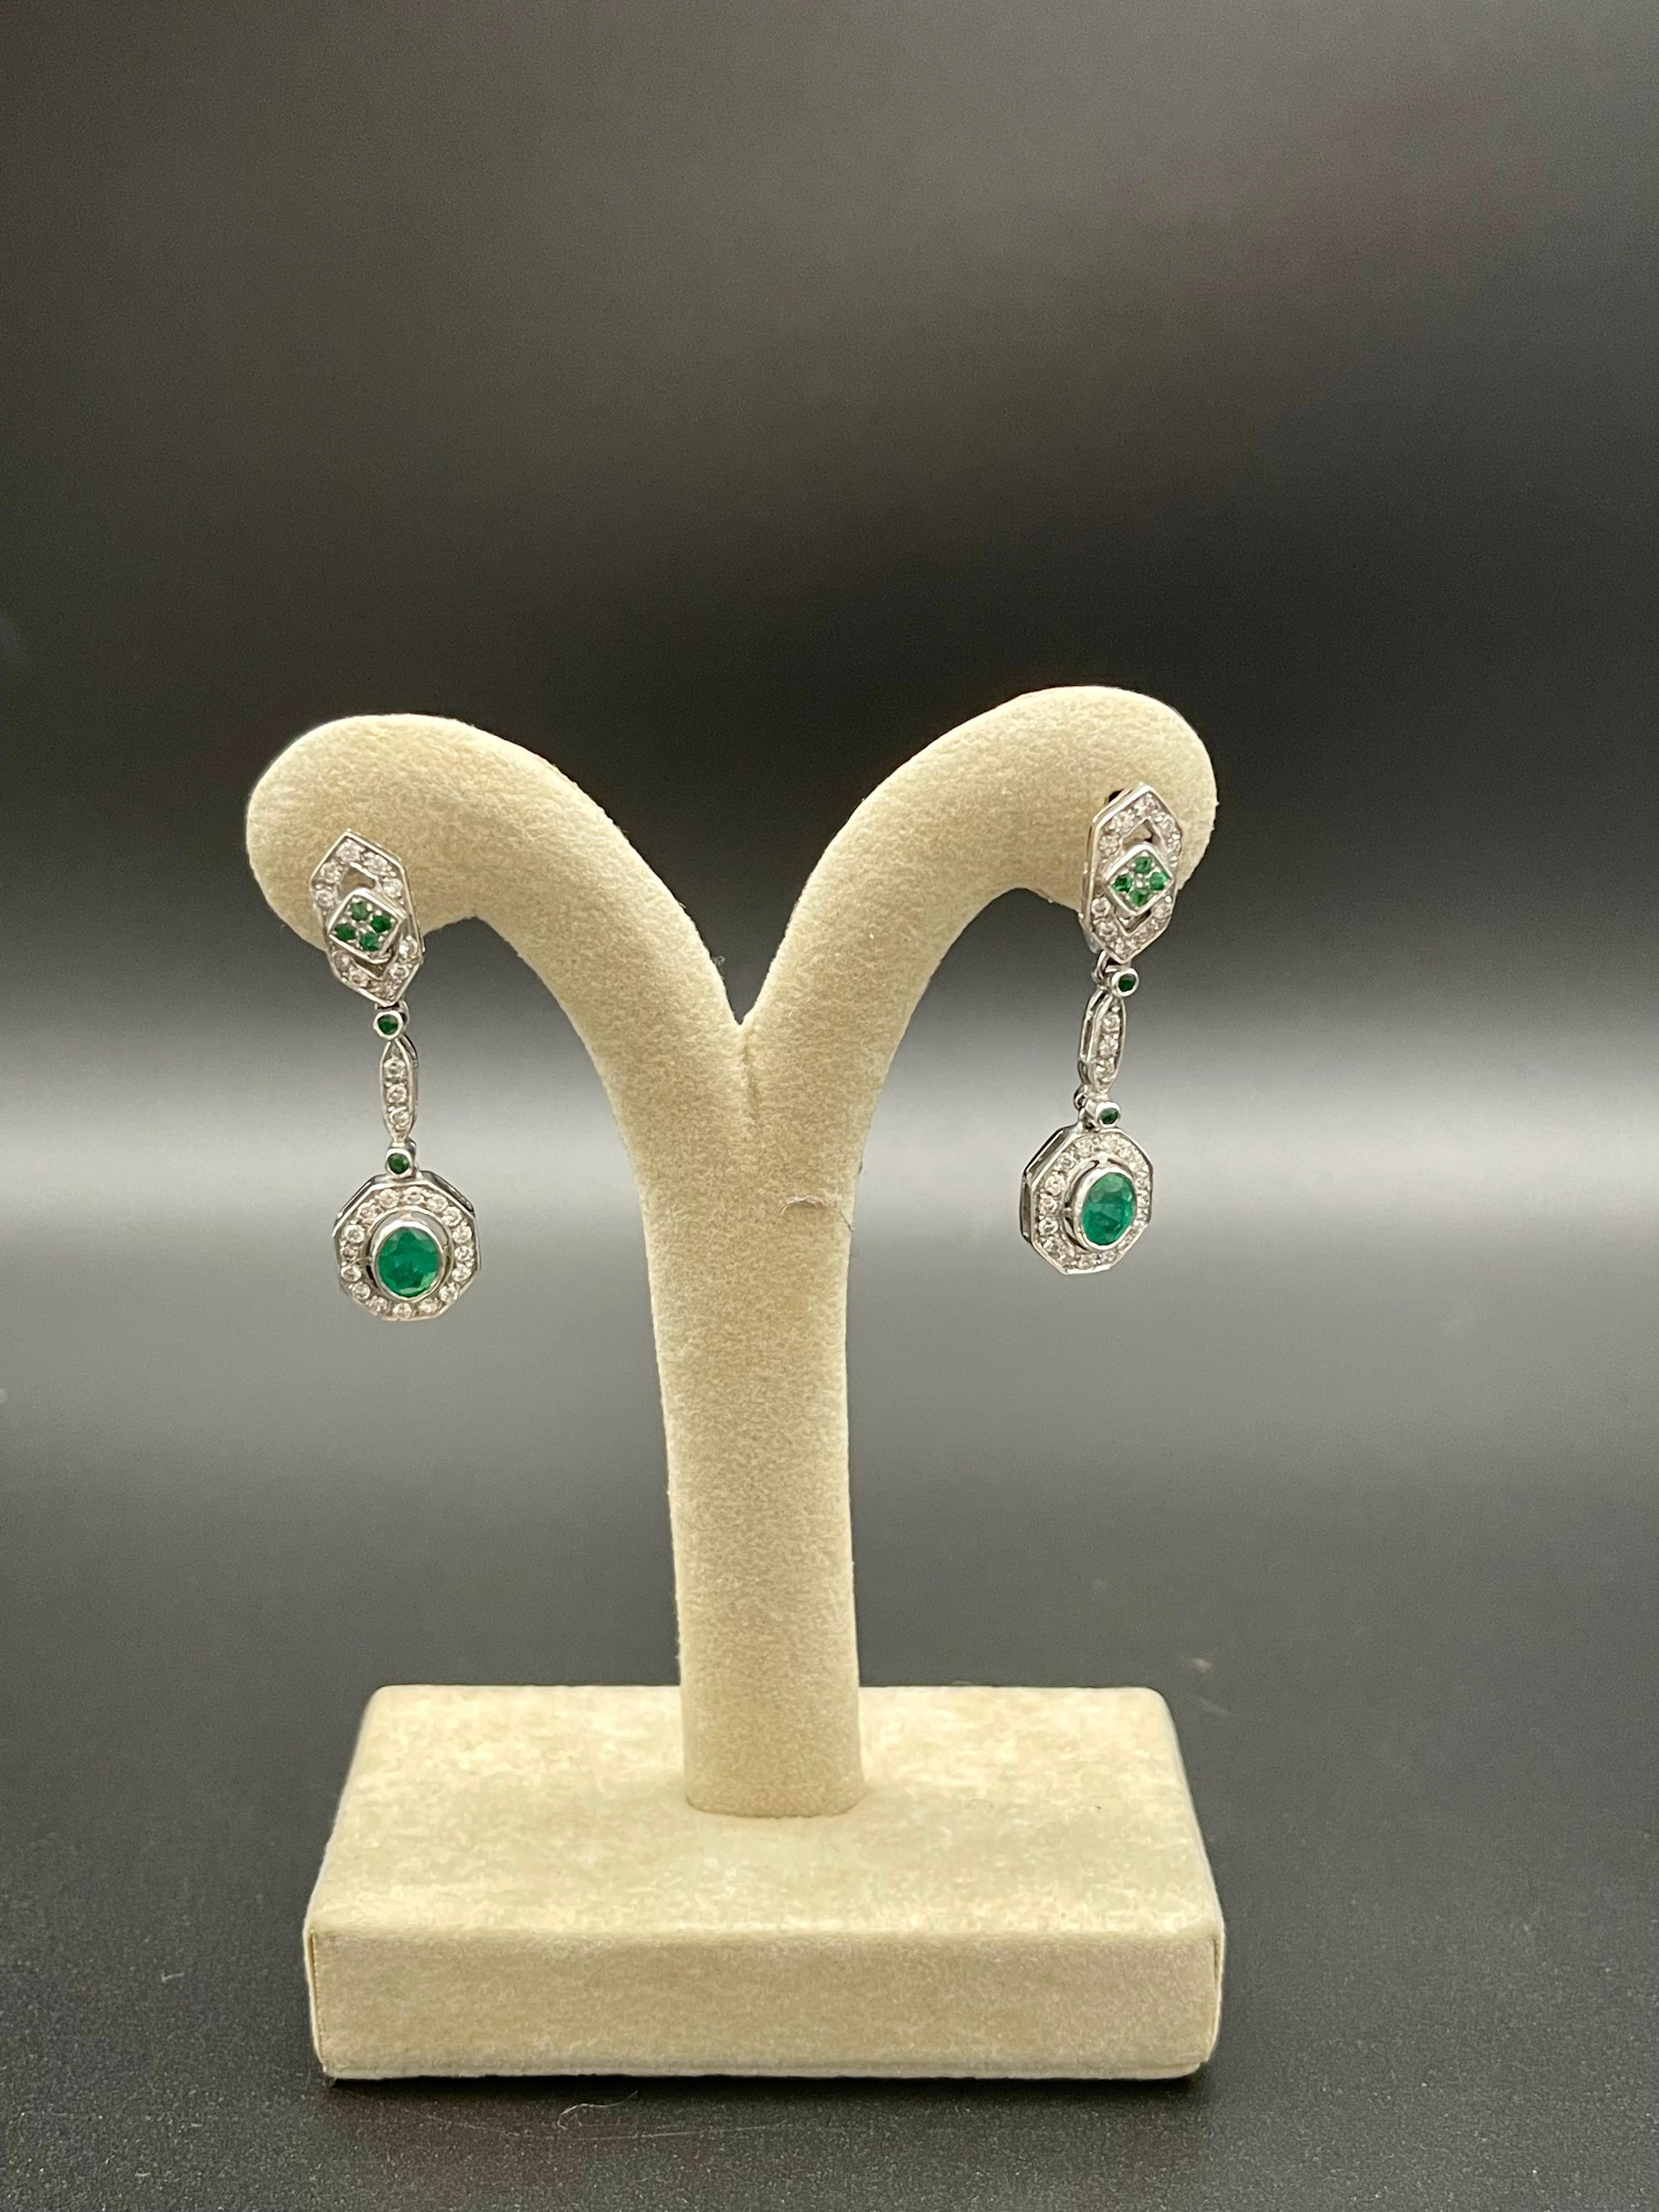 A Breathtaking pair of Portuguese Earrings in Art Deco Revival Style with a stunning work of craftsmanship.  

This wonderful 19.2 Karat Portuguese White gold earrings beautifully blend color, sparkle, and sweeping, graceful curves. These glamorous